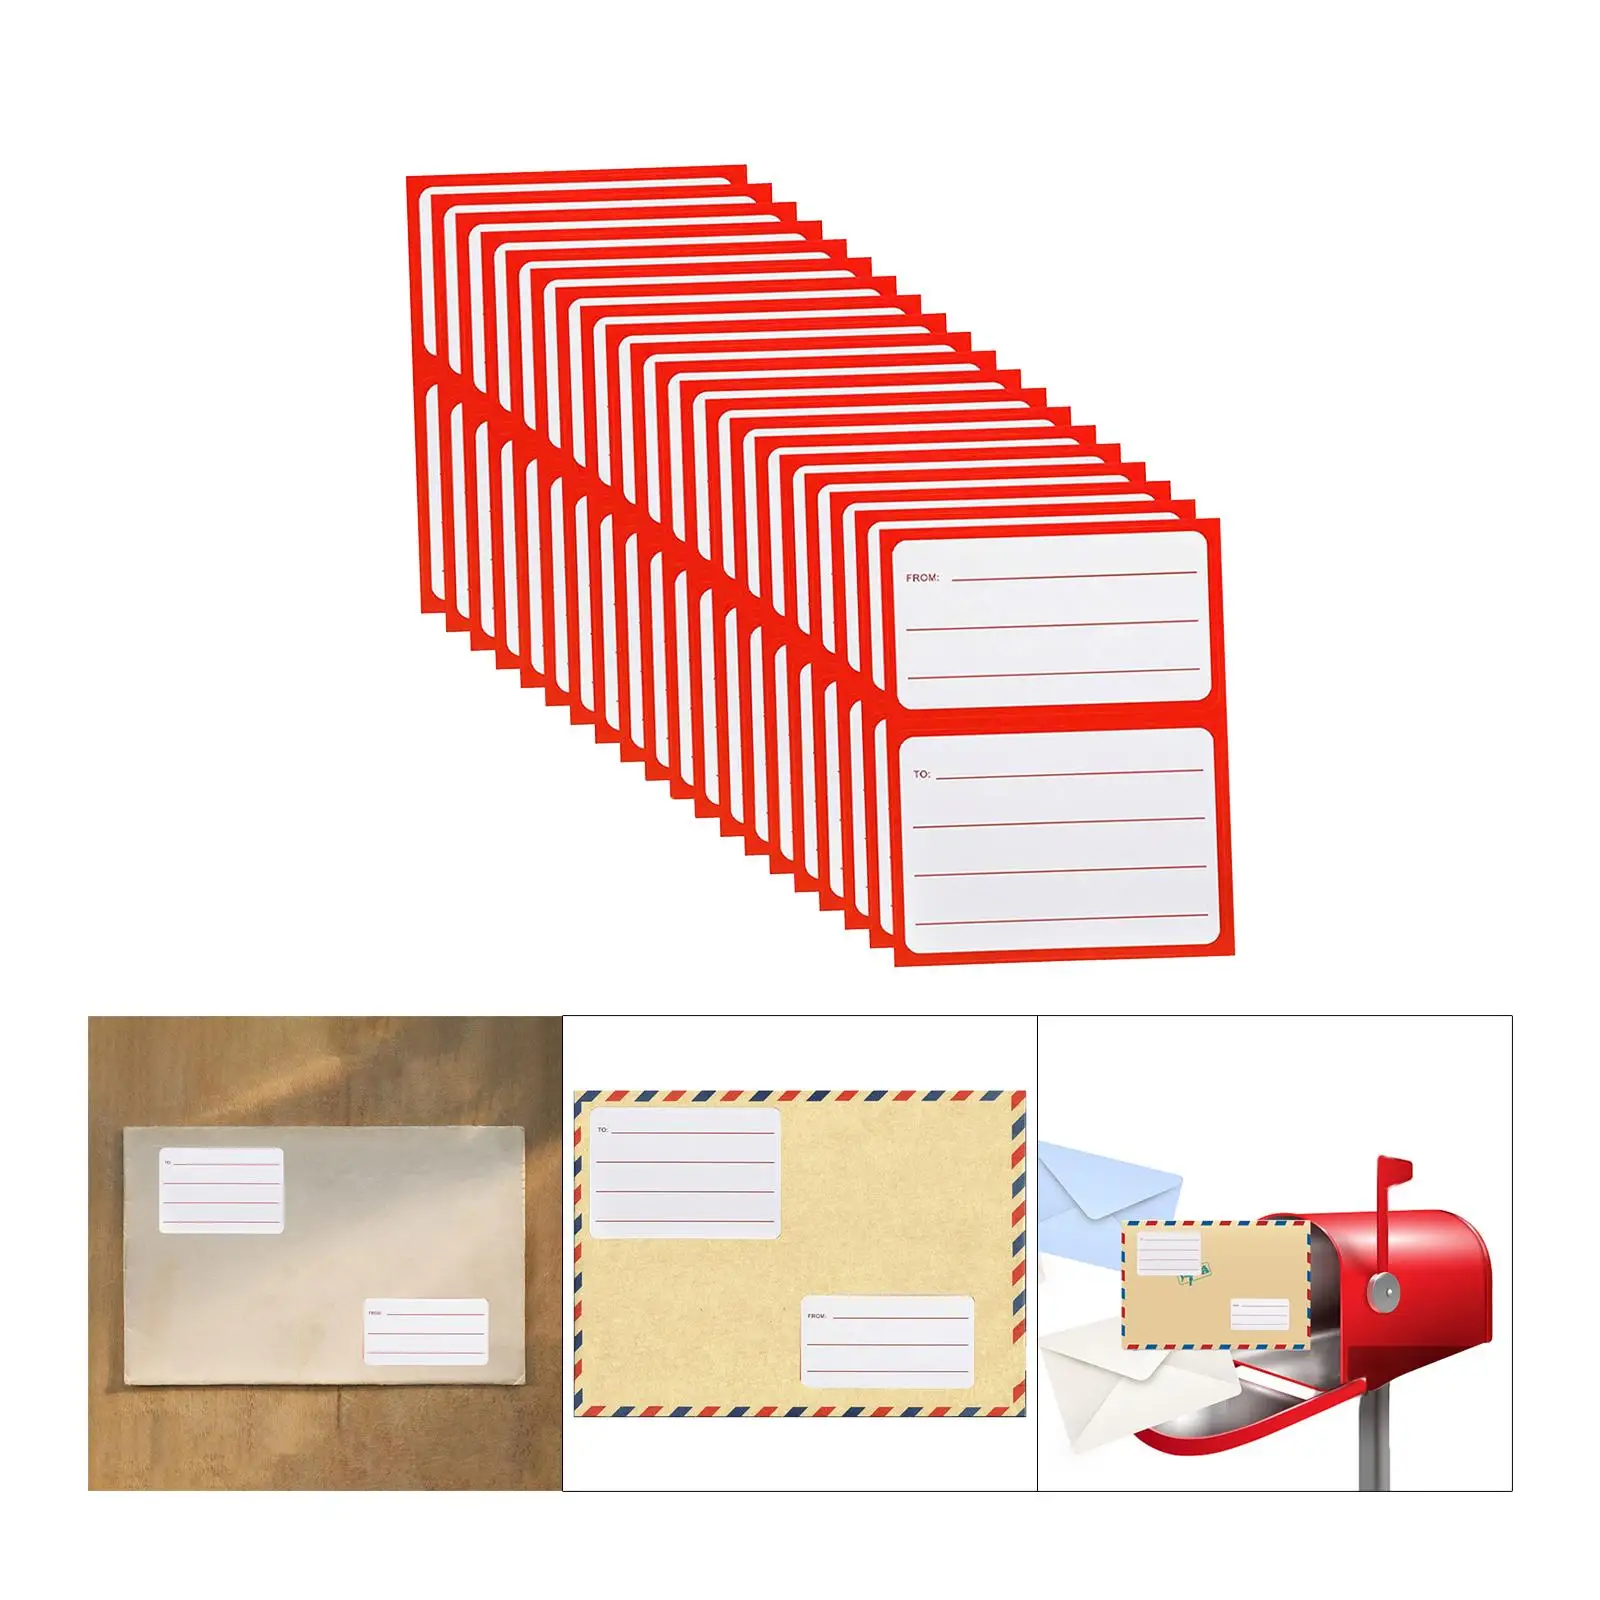 

50Sheets to/from Address Mailing Labels 3.5 x 4.5 inch Blank Mail Shipping Label Adhesive for Envelopes Packages Home